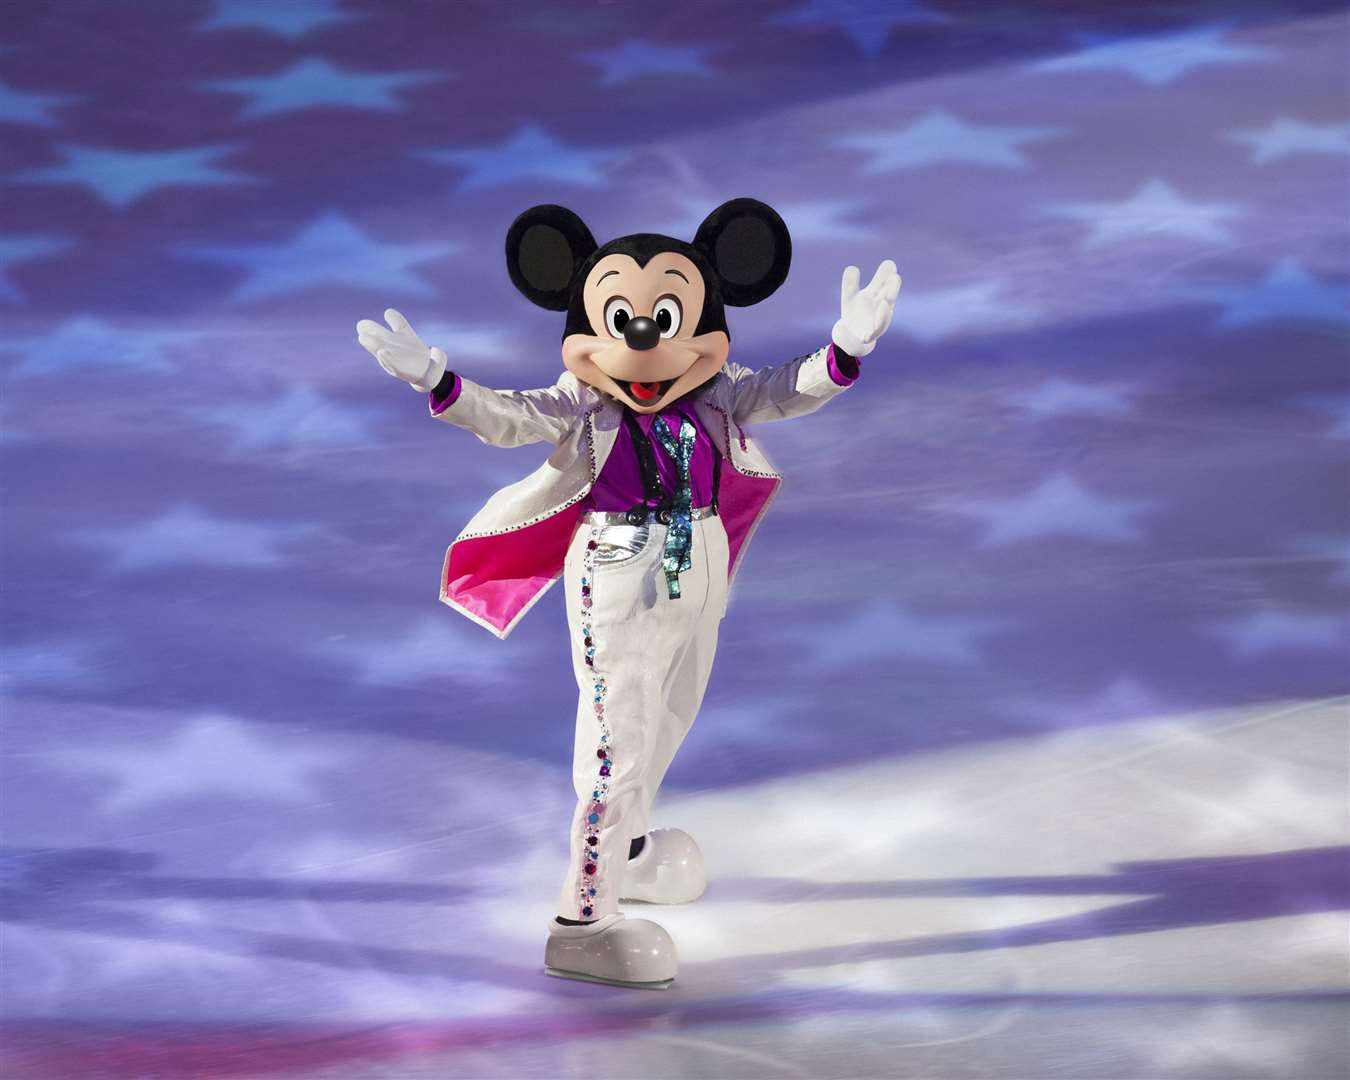 Mickey Mouse will be just one of the much loved characters appearing in Disney On Ice.